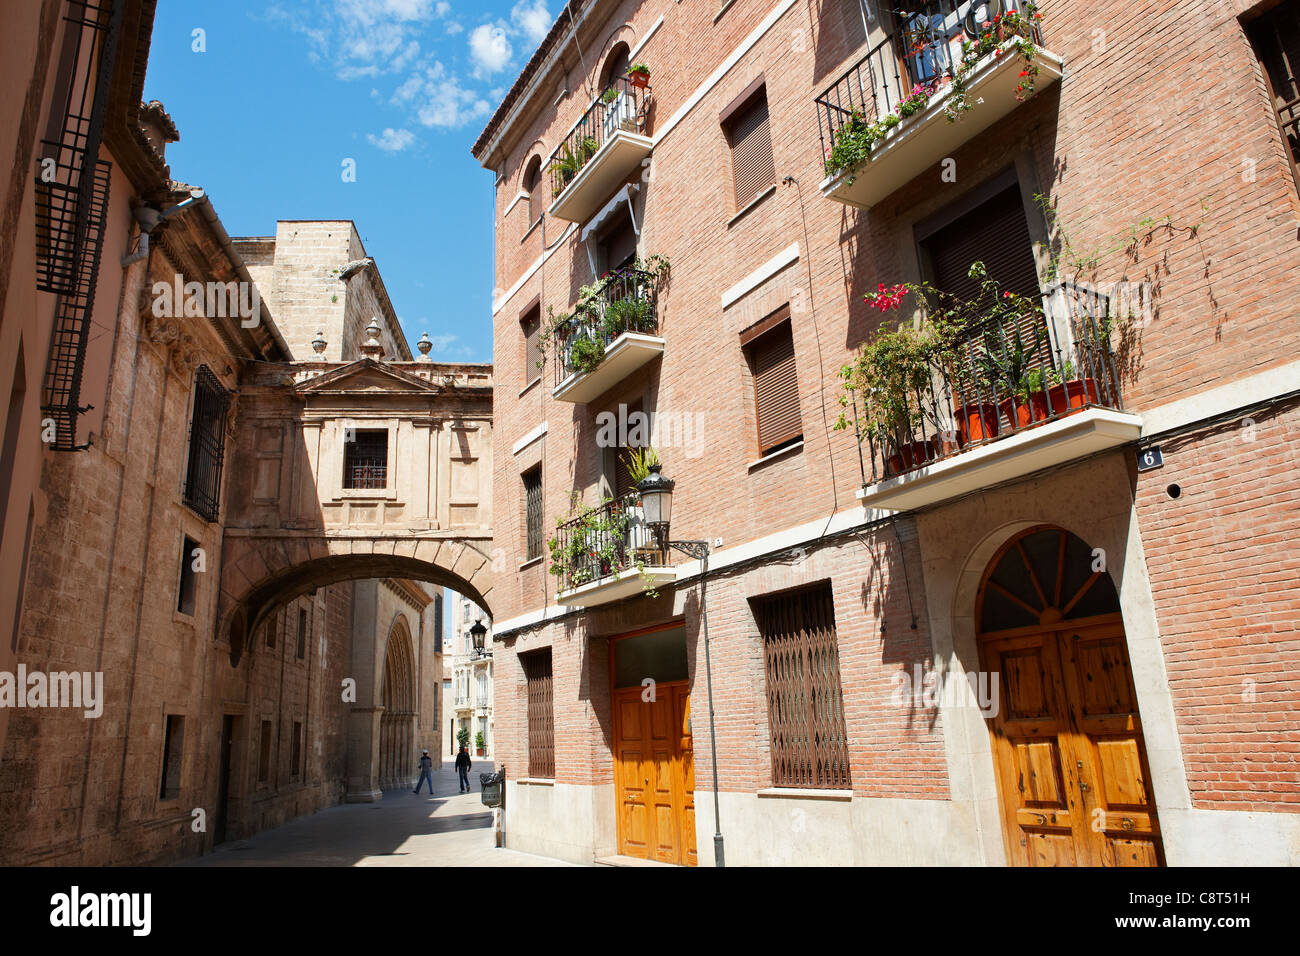 Narrow street in the old town. Valencia, Spain. Stock Photo